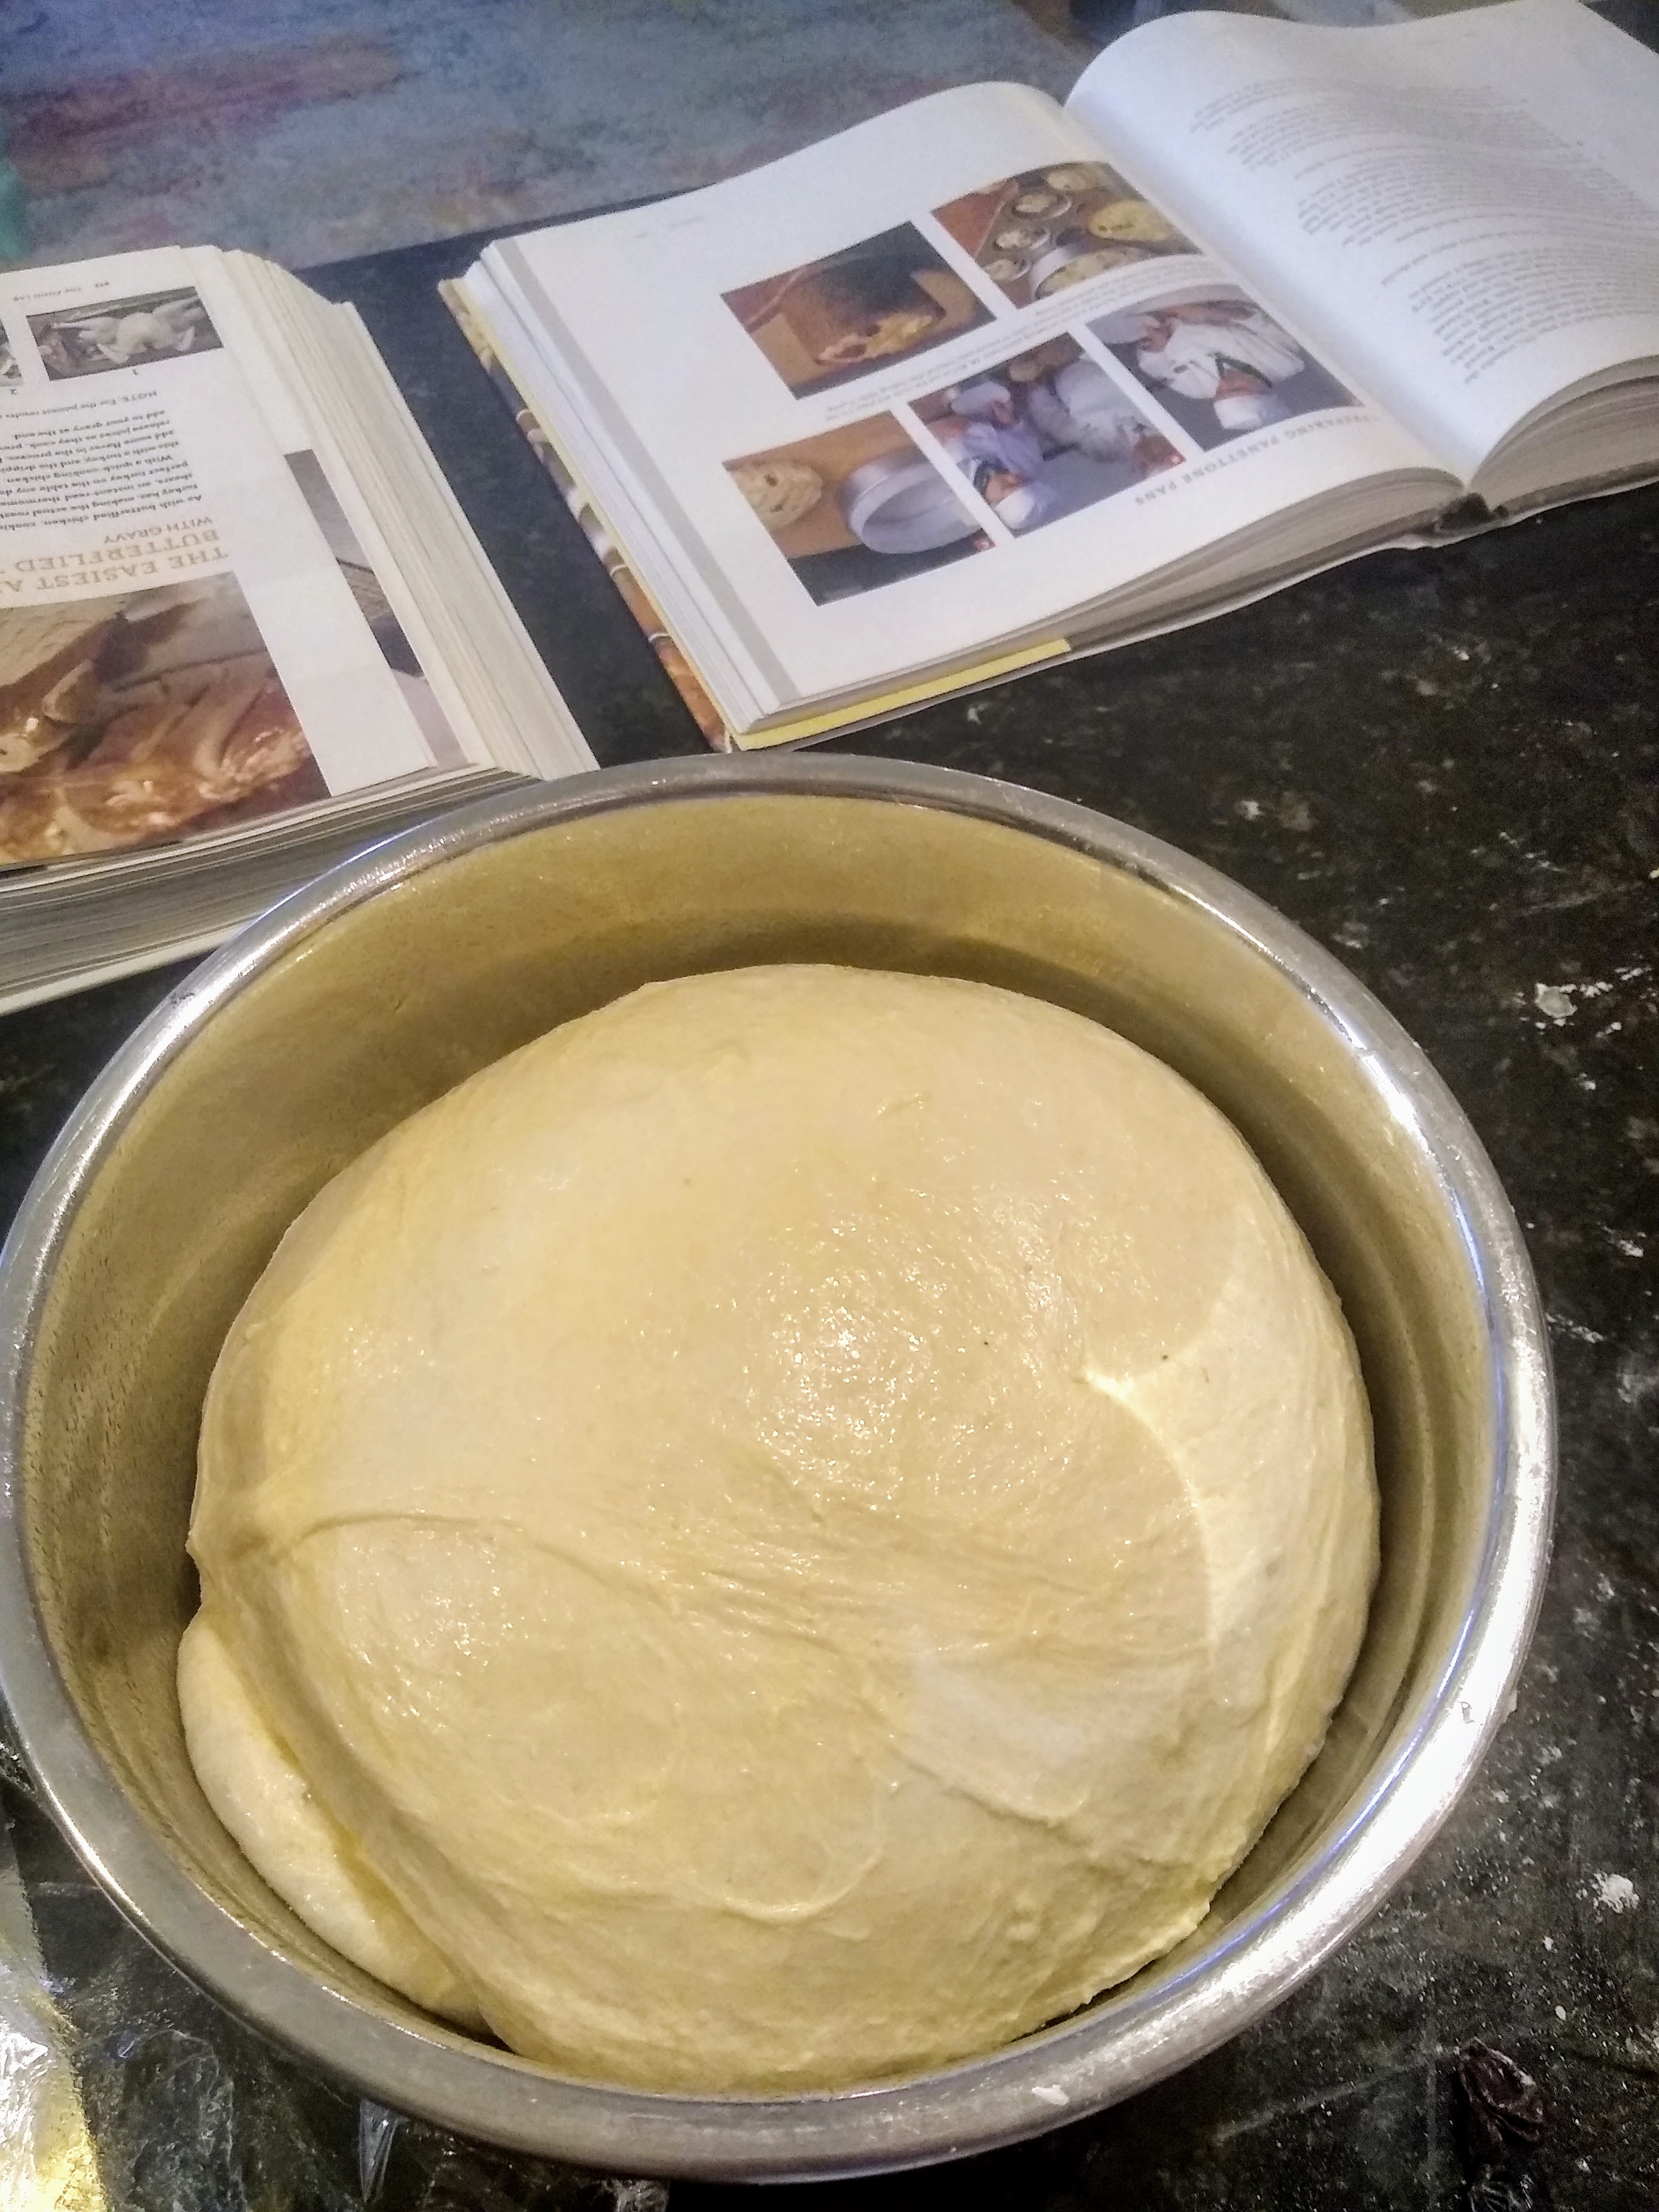 Dough, sitting in a bowl